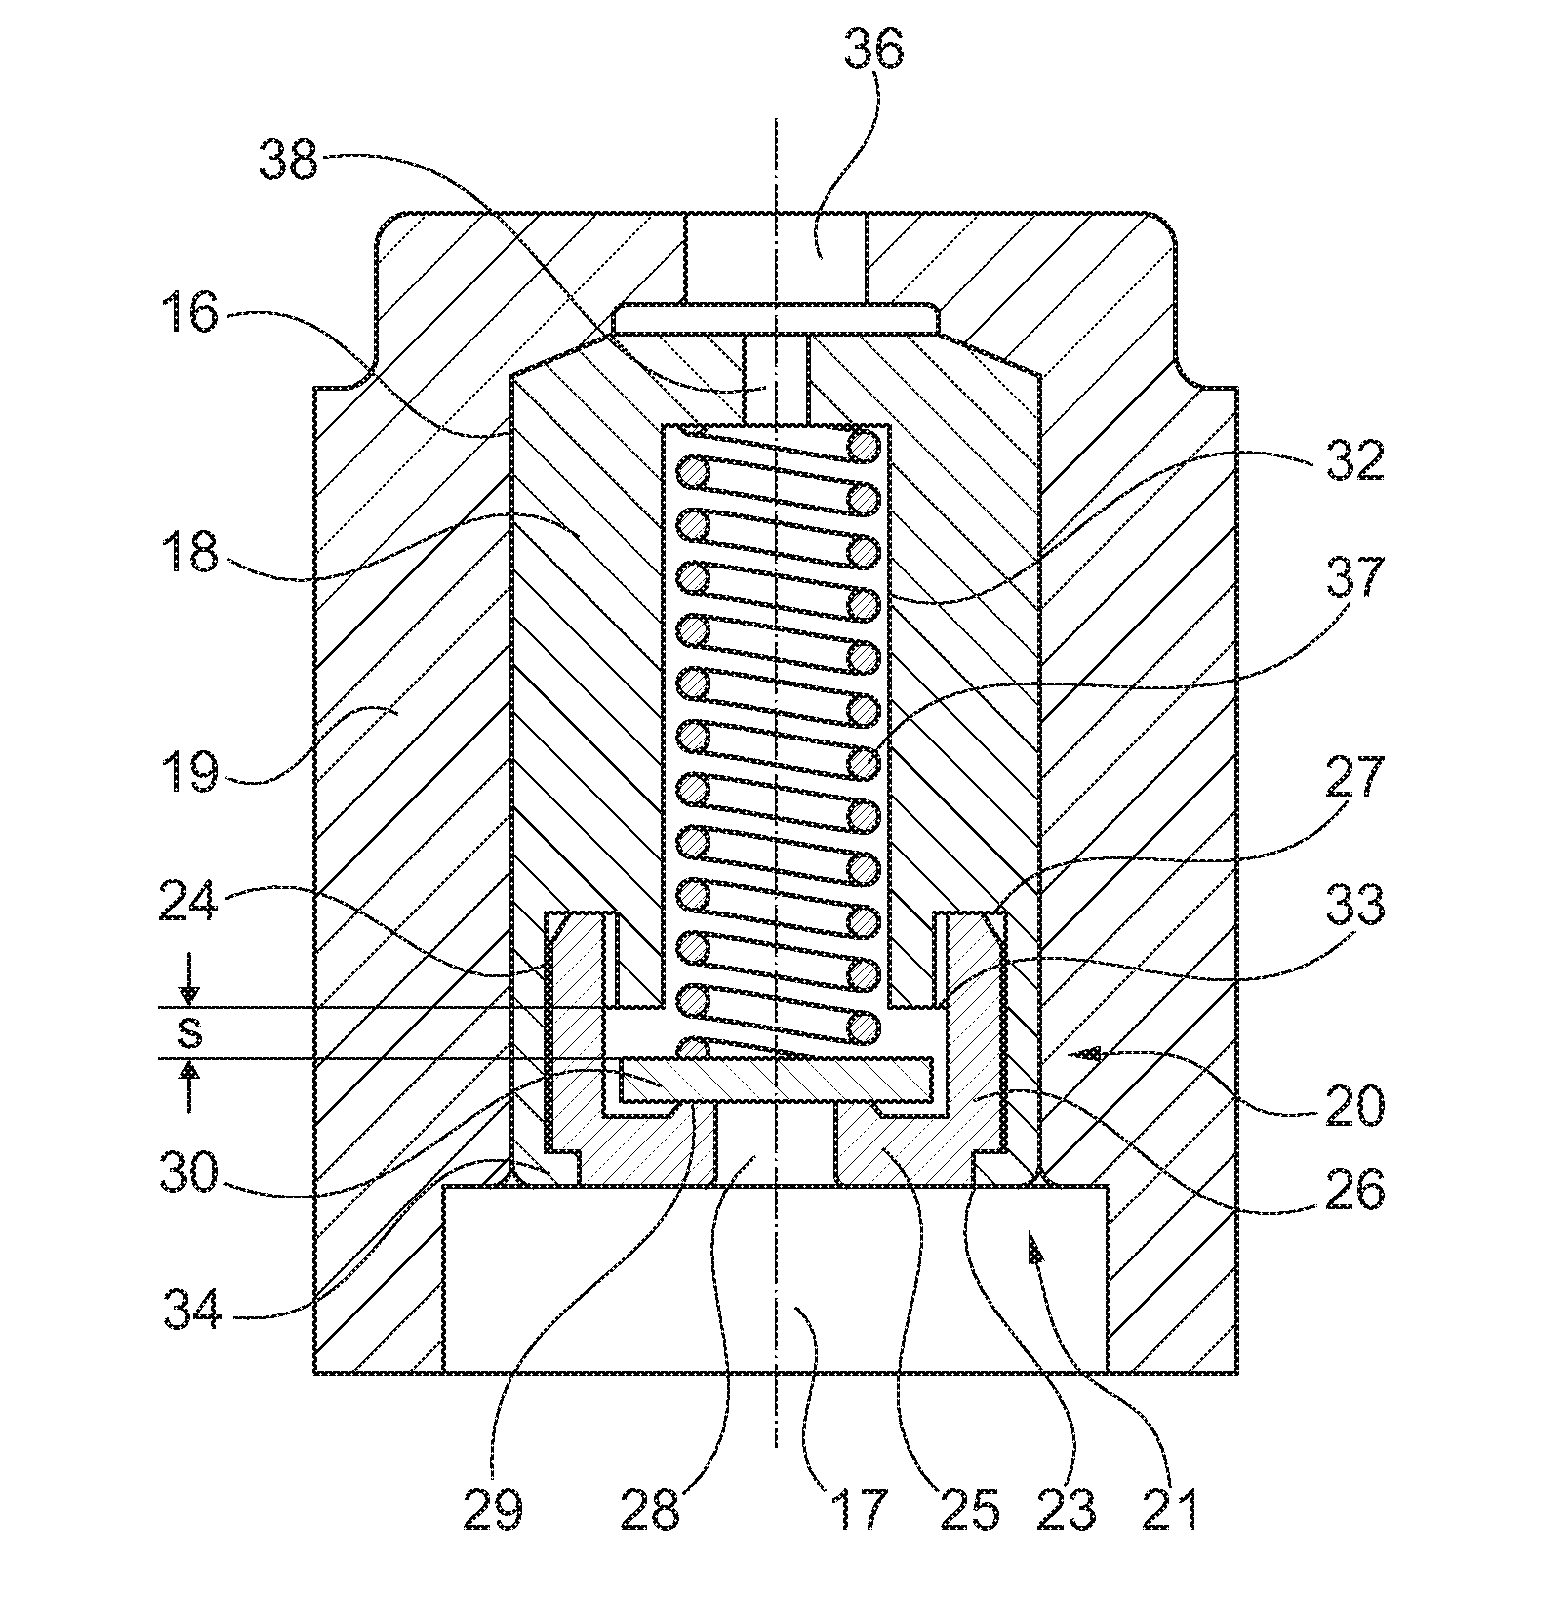 Hydraulic tensioning device for a traction mechanism drive